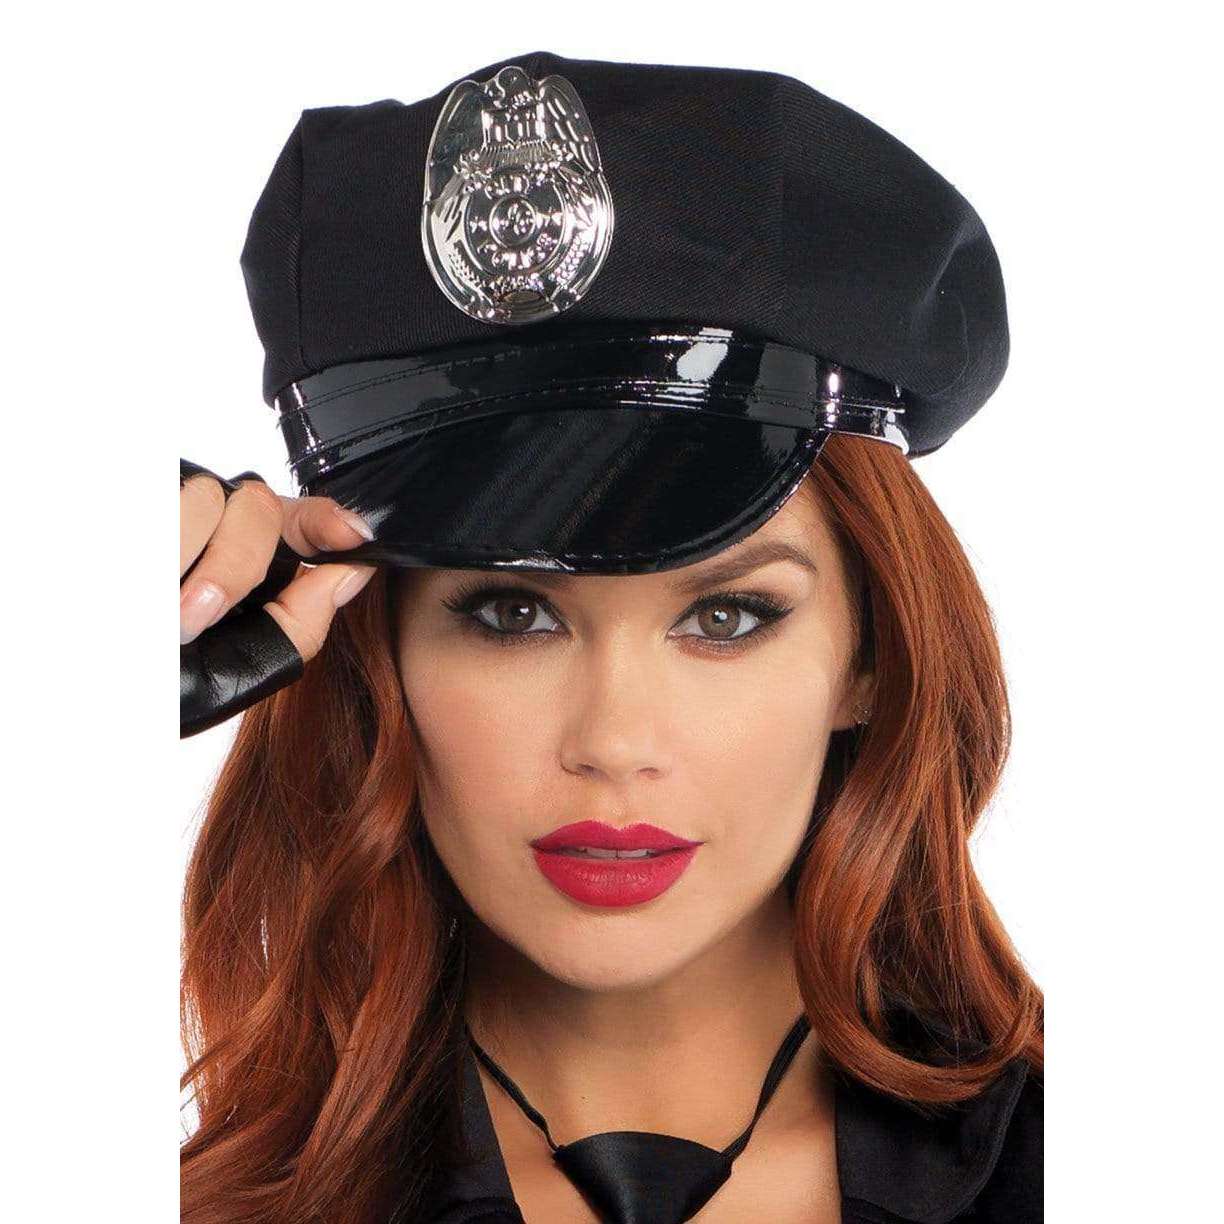 Sexy Dirty Cop Adult Costume